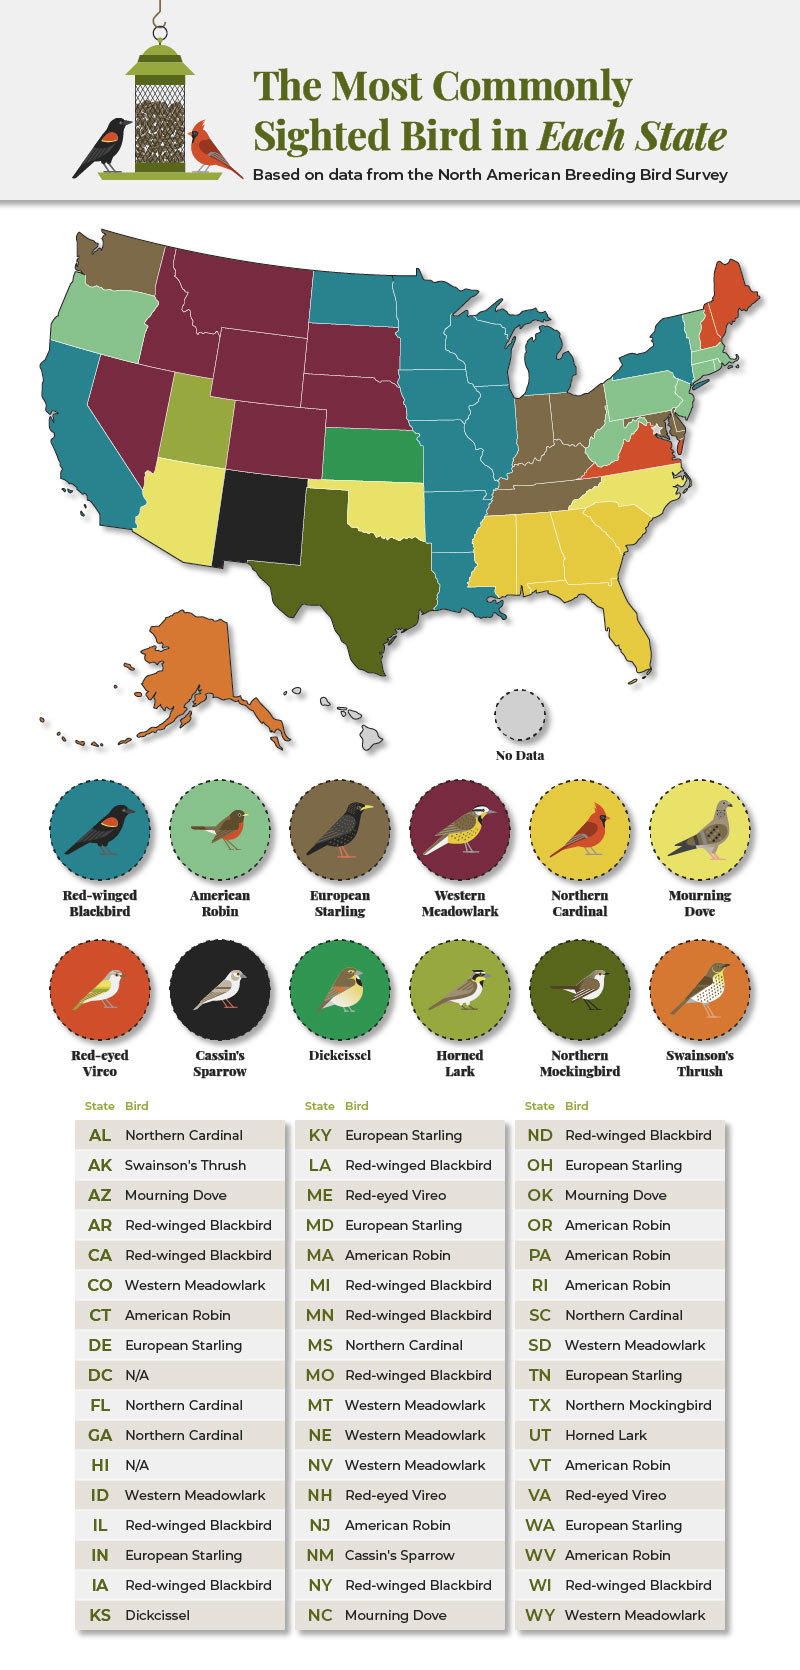 The most commonly sighted bird in each U.S state